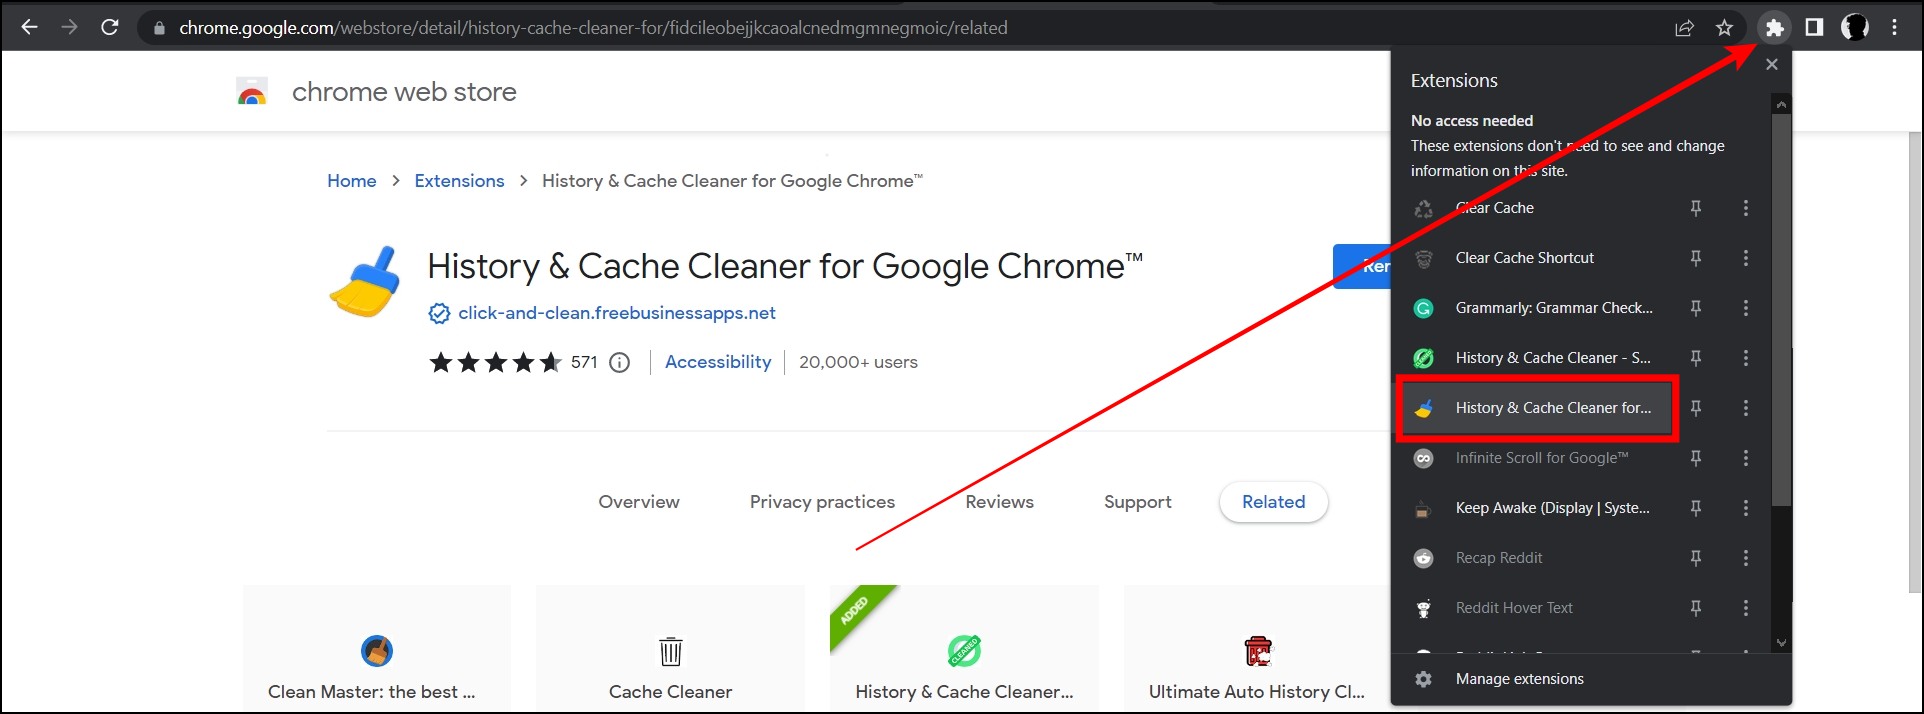 History & Cache Cleaner for Google Chrome Extension